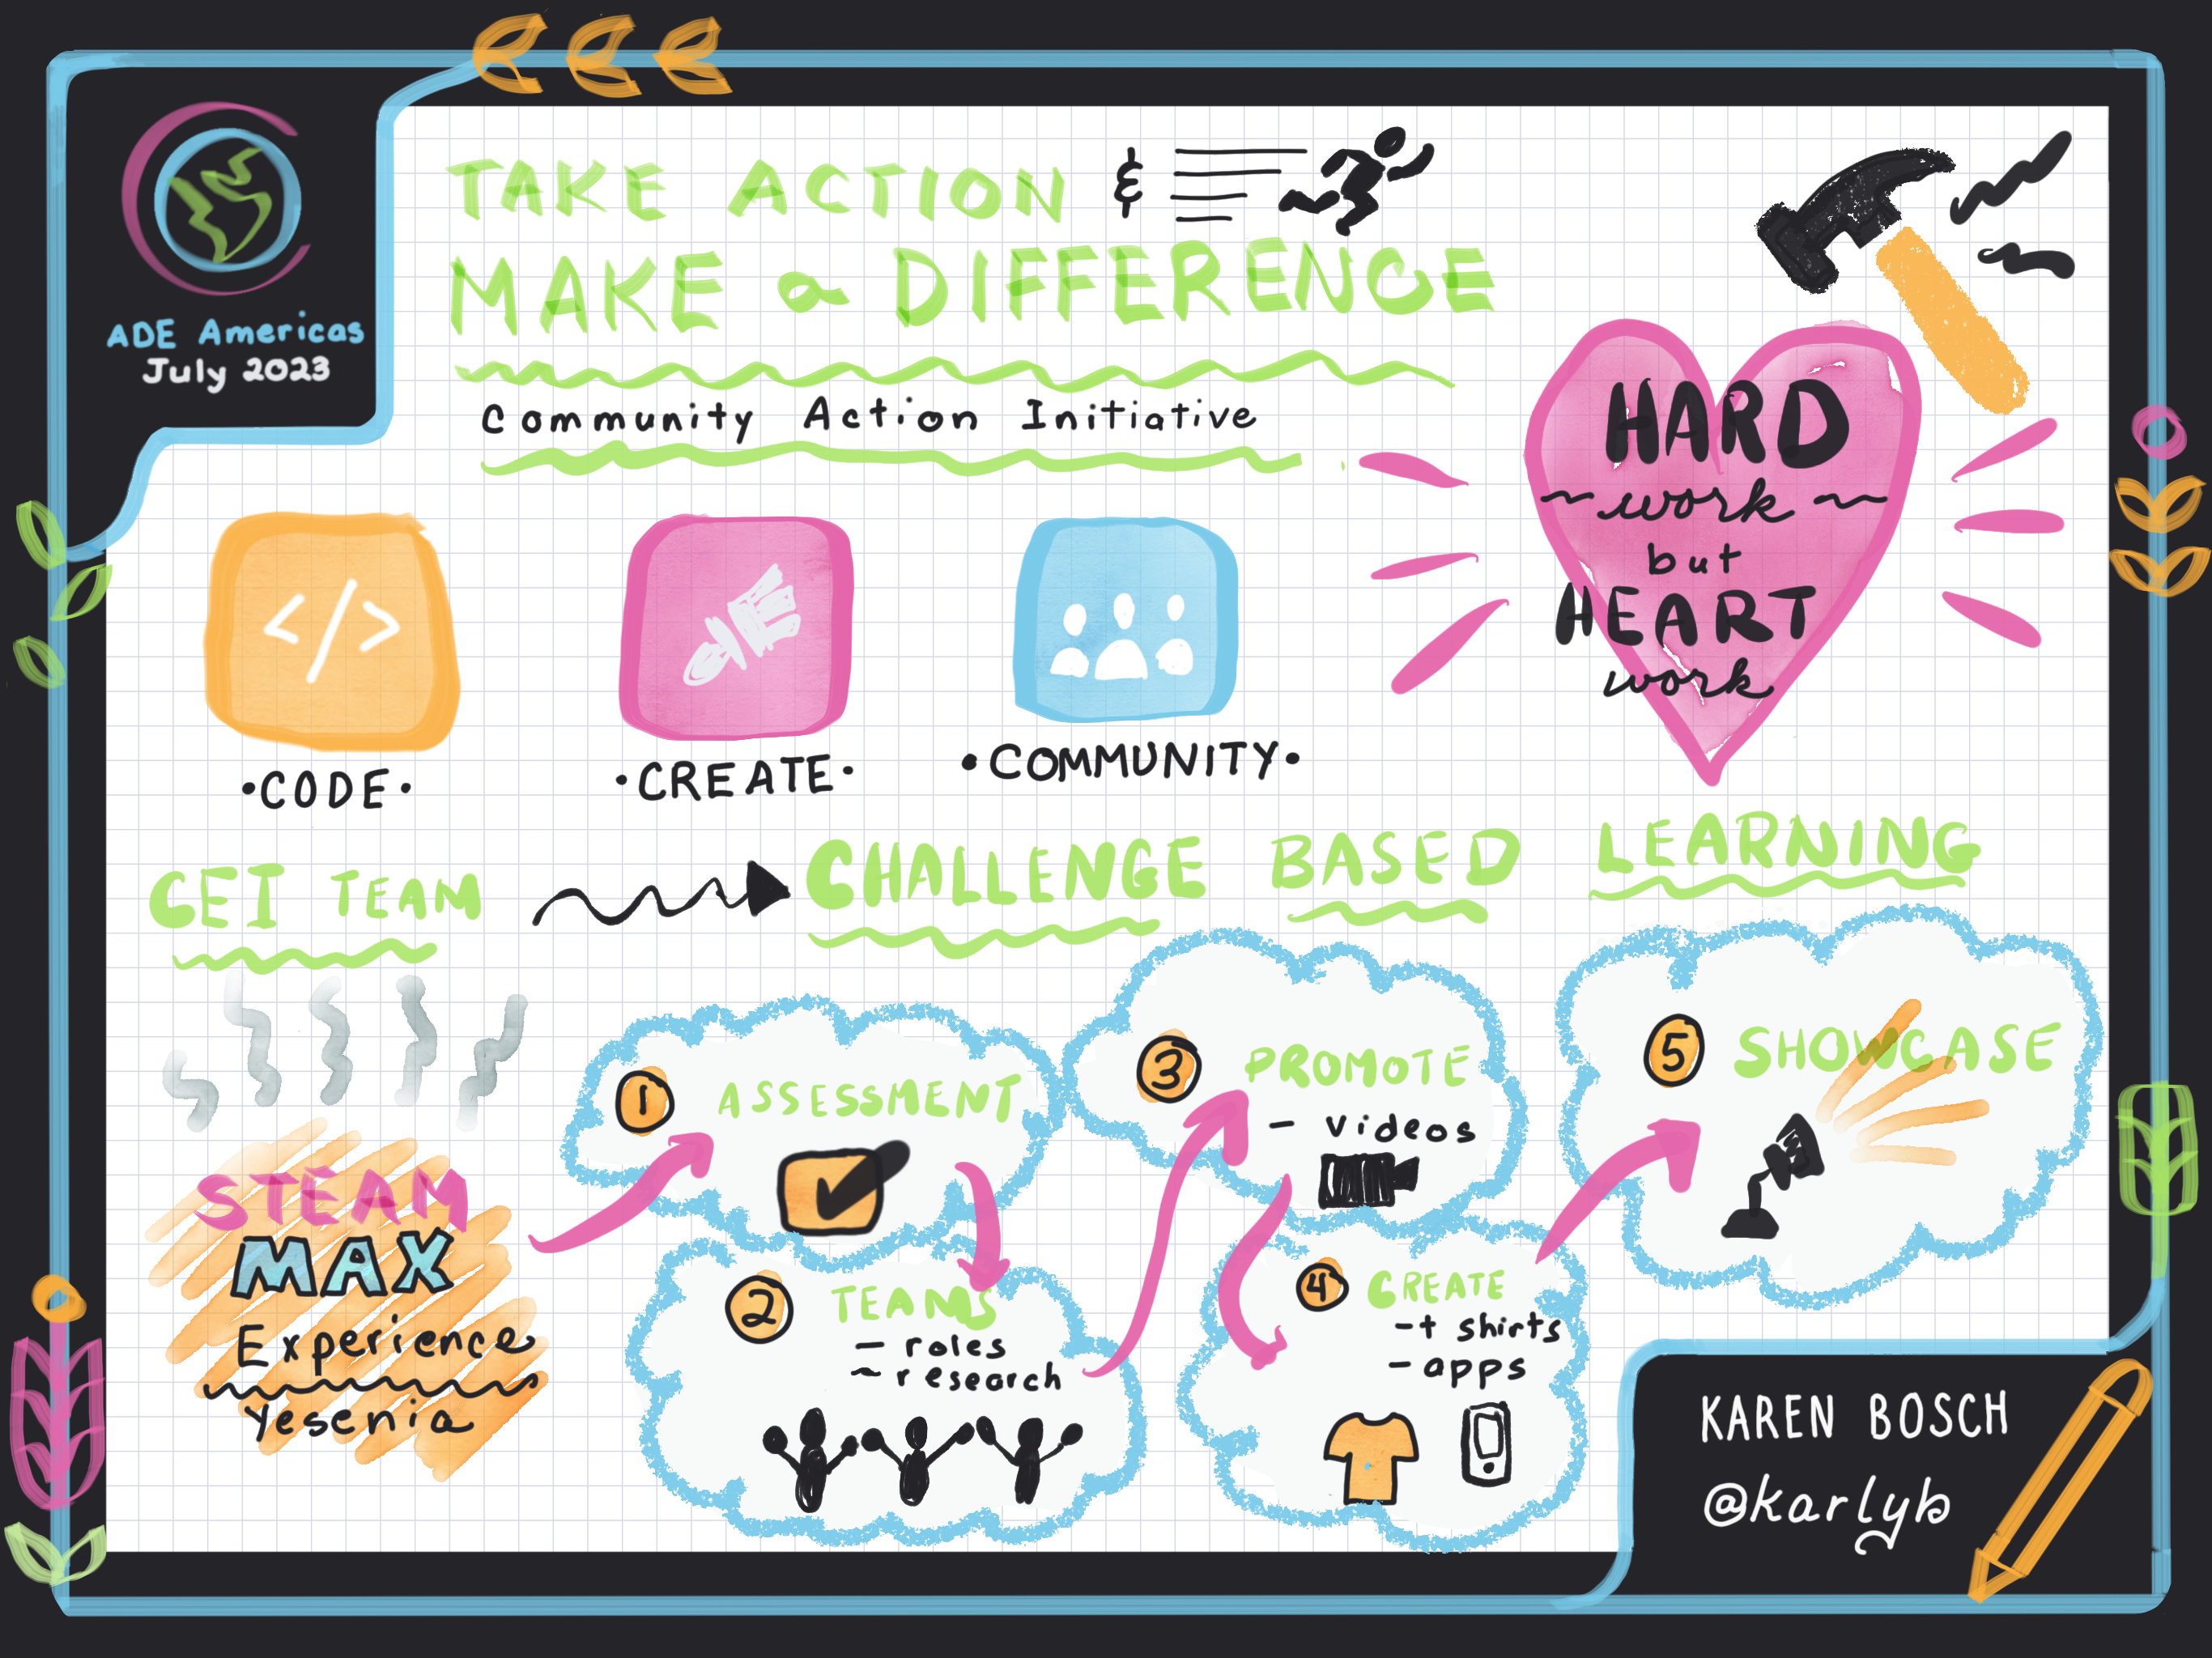 Sketchnote - Take Action and Make a Difference